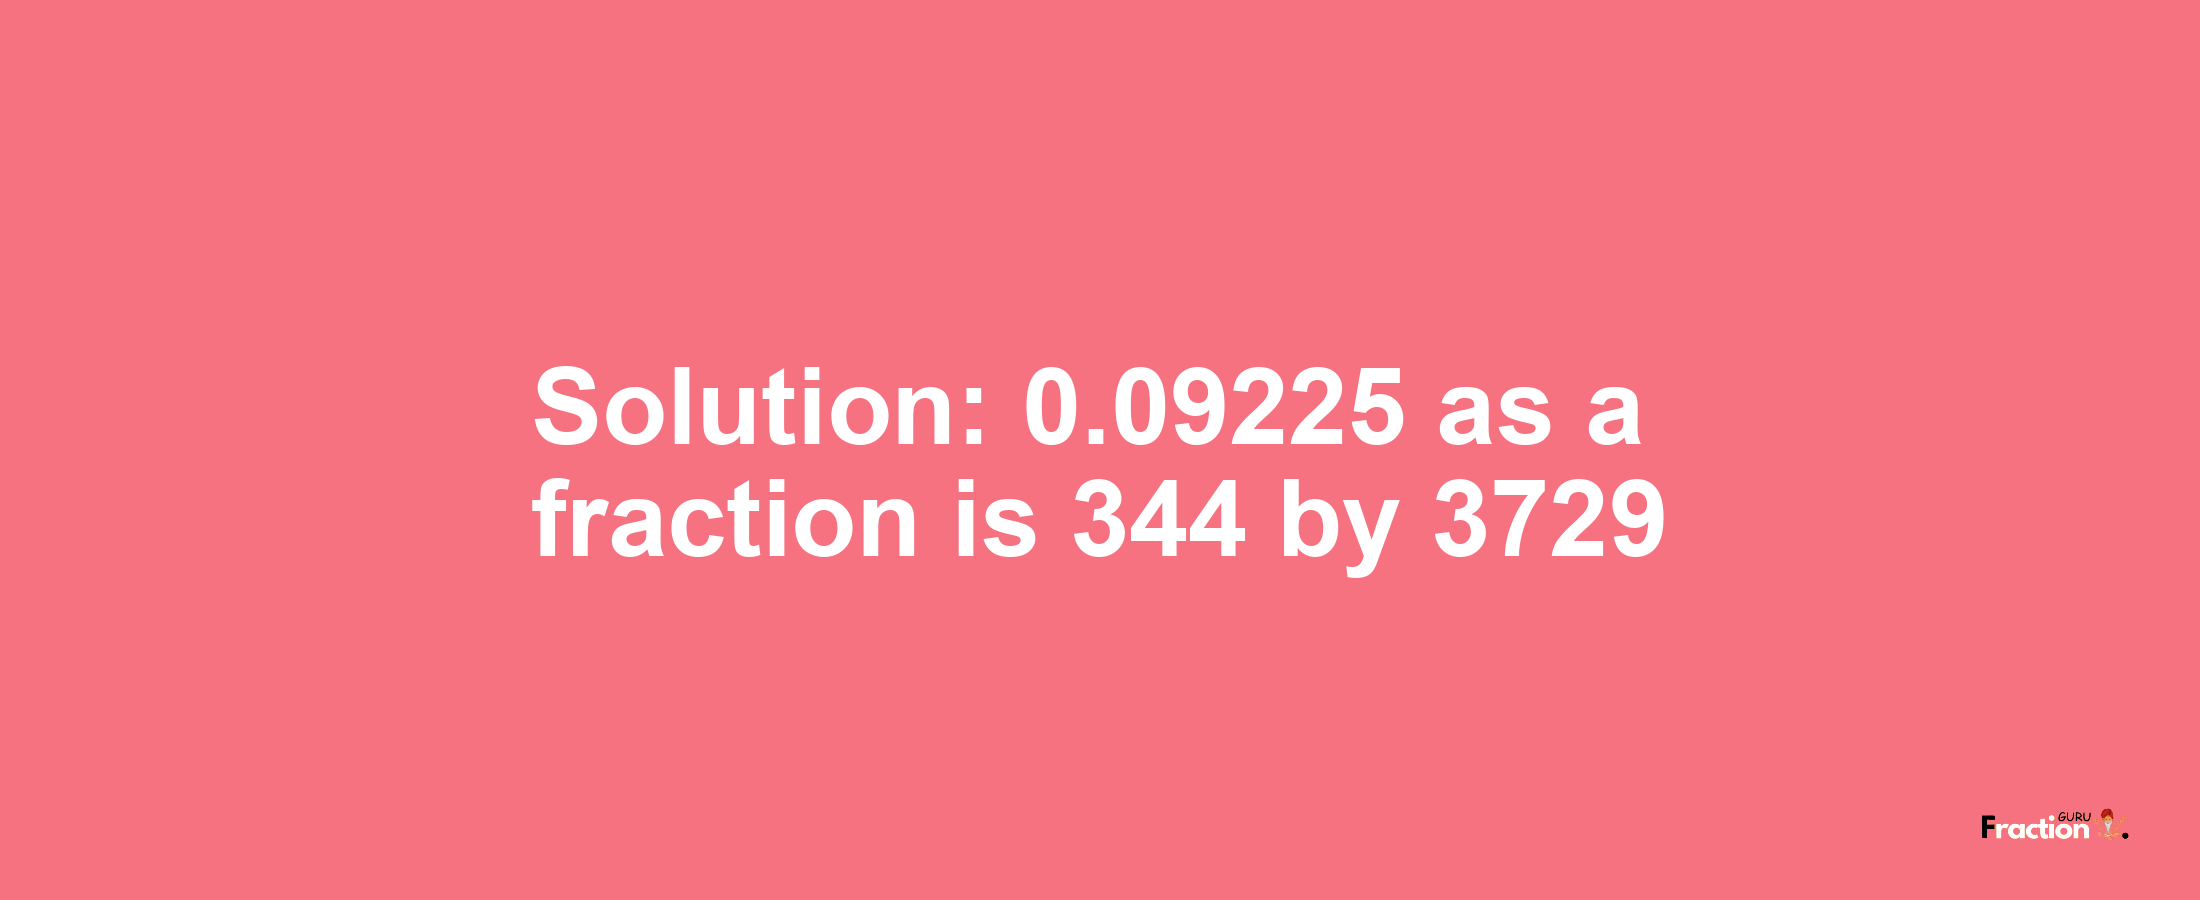 Solution:0.09225 as a fraction is 344/3729